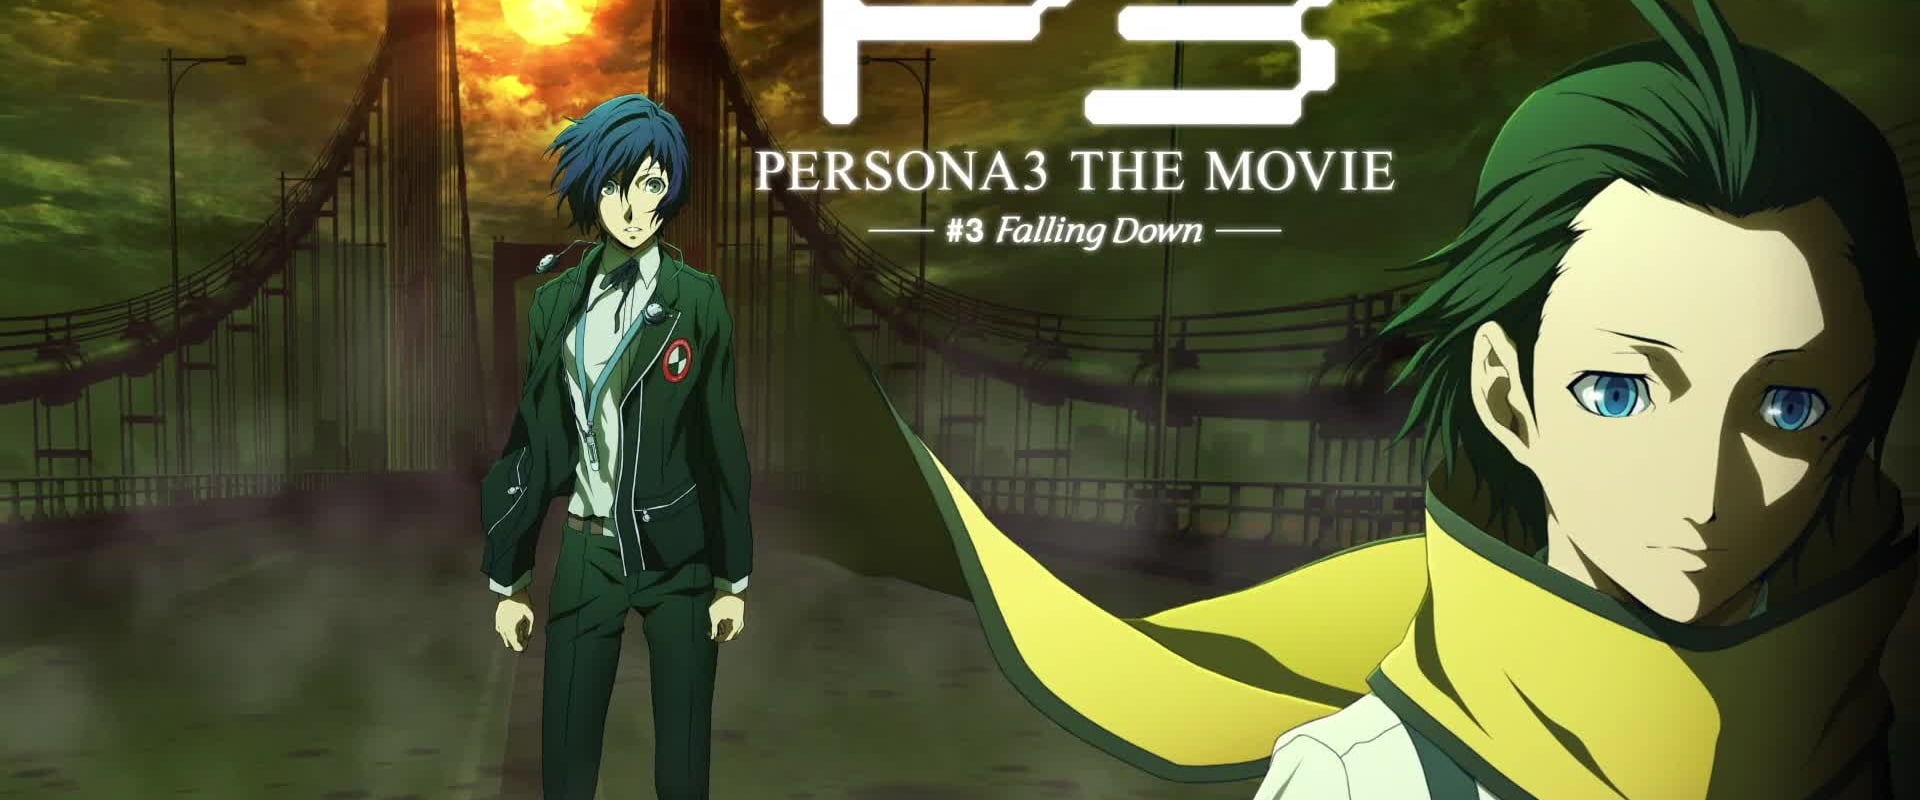 Persona 3 the Movie 3 Falling Down